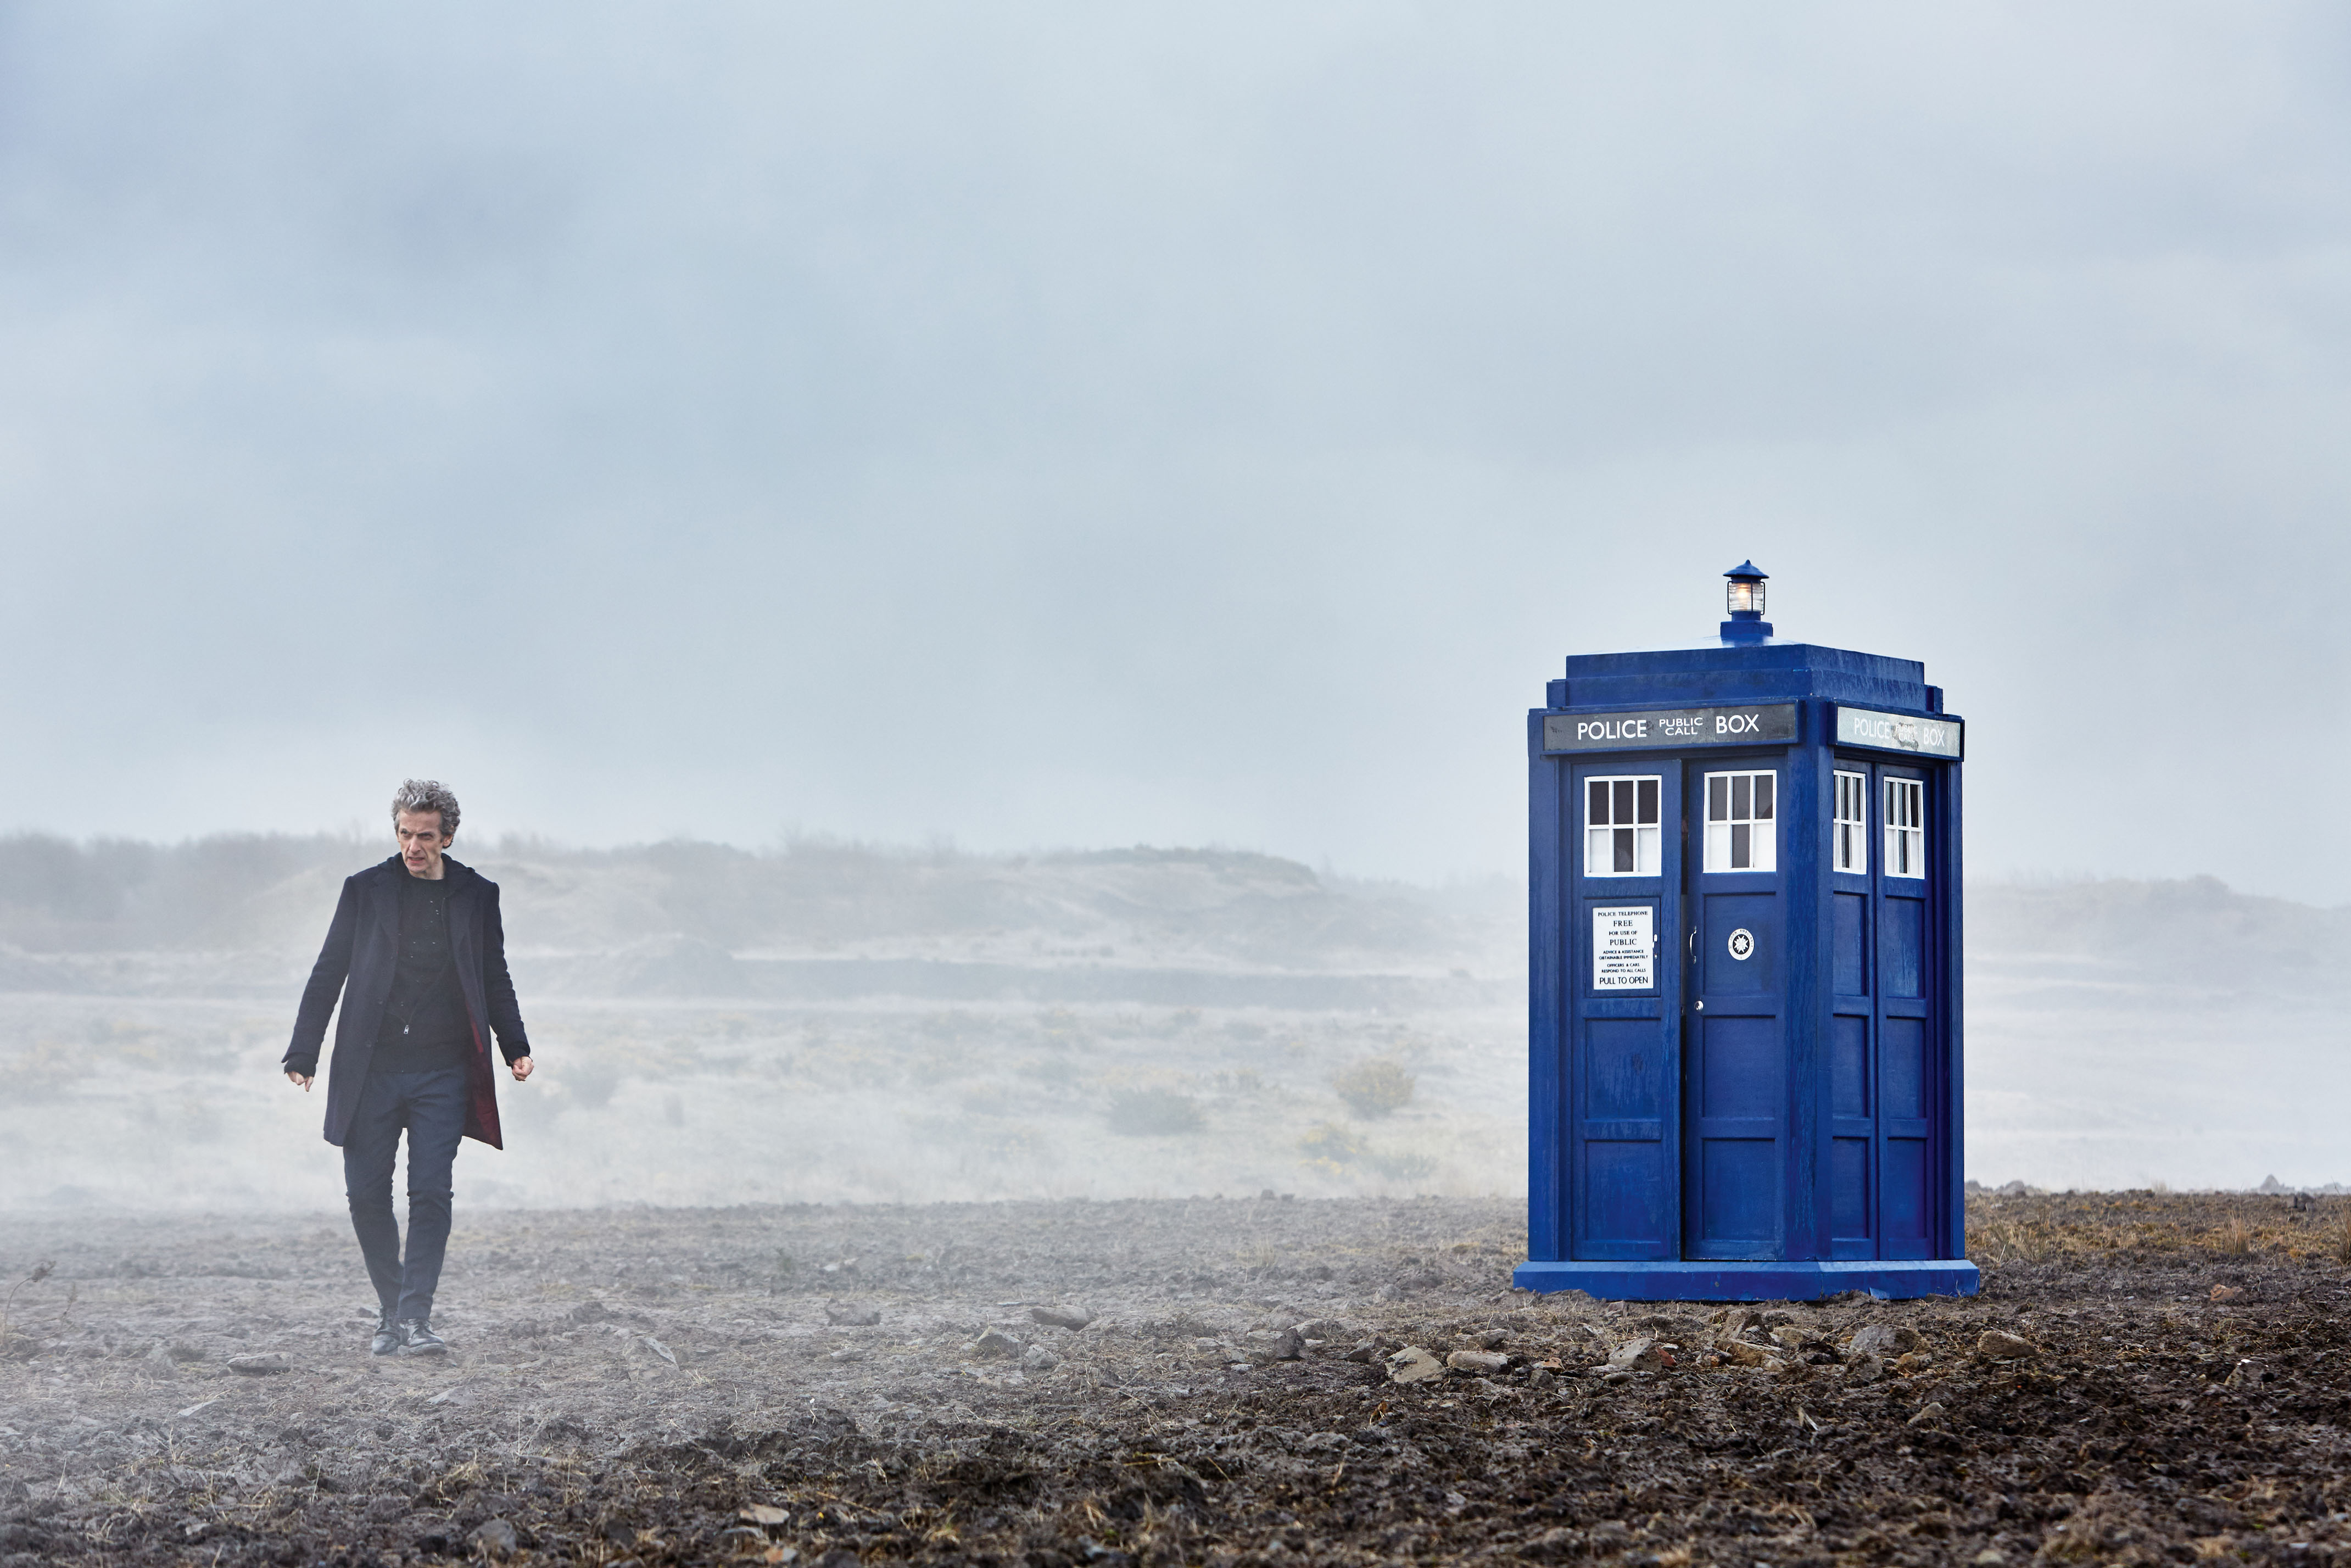 tardis, tv show, doctor who, 12th doctor, peter capaldi